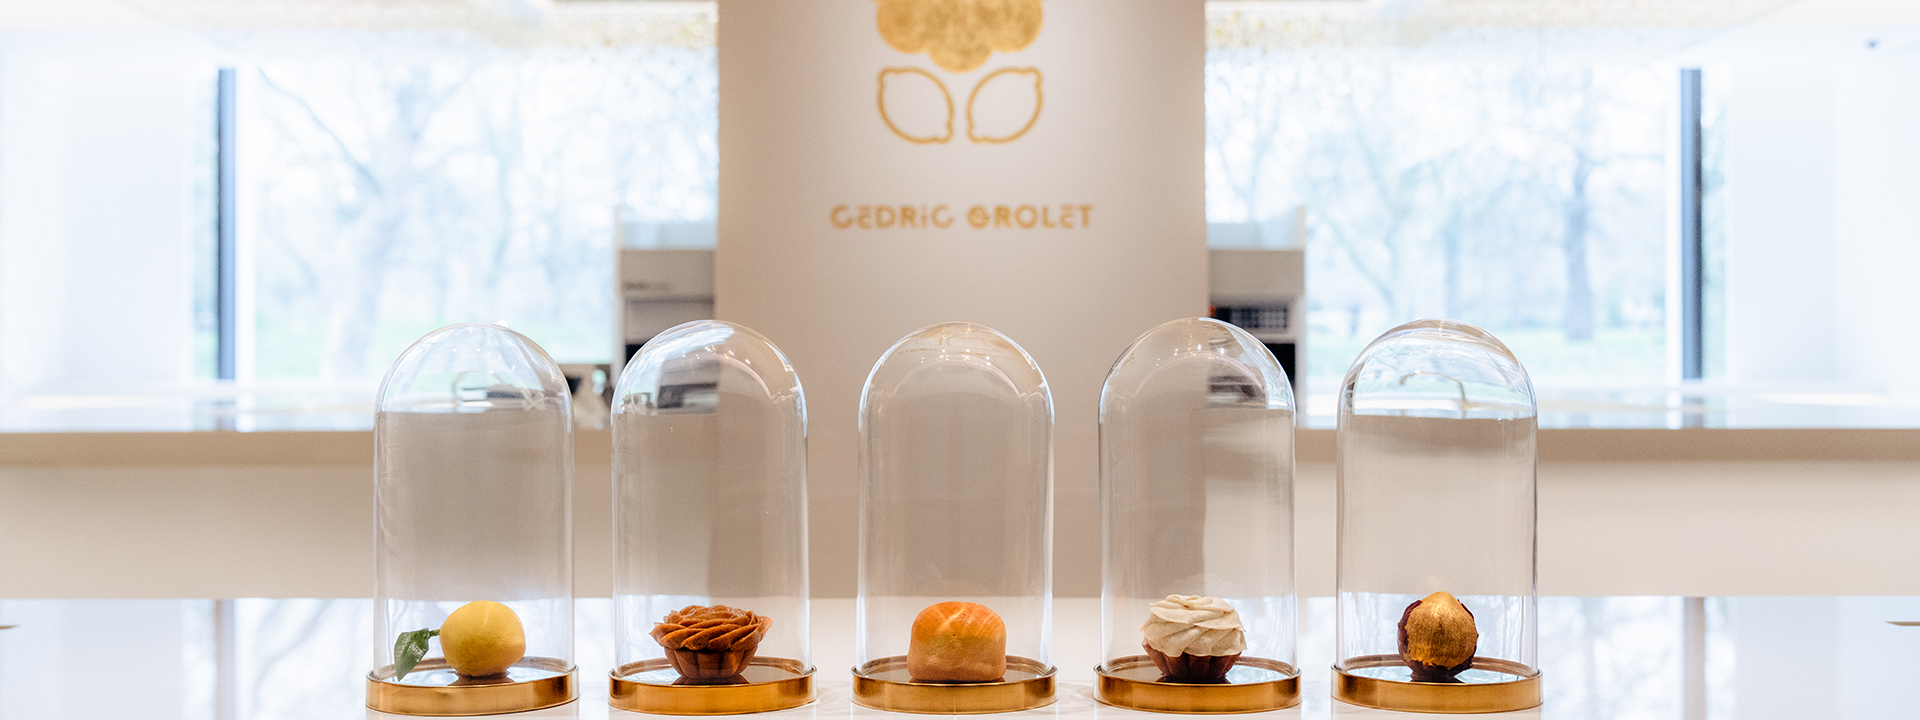 Image shows five cakes in cloches on a counter top. In the background a gold Cedric Grolet counter is visible.